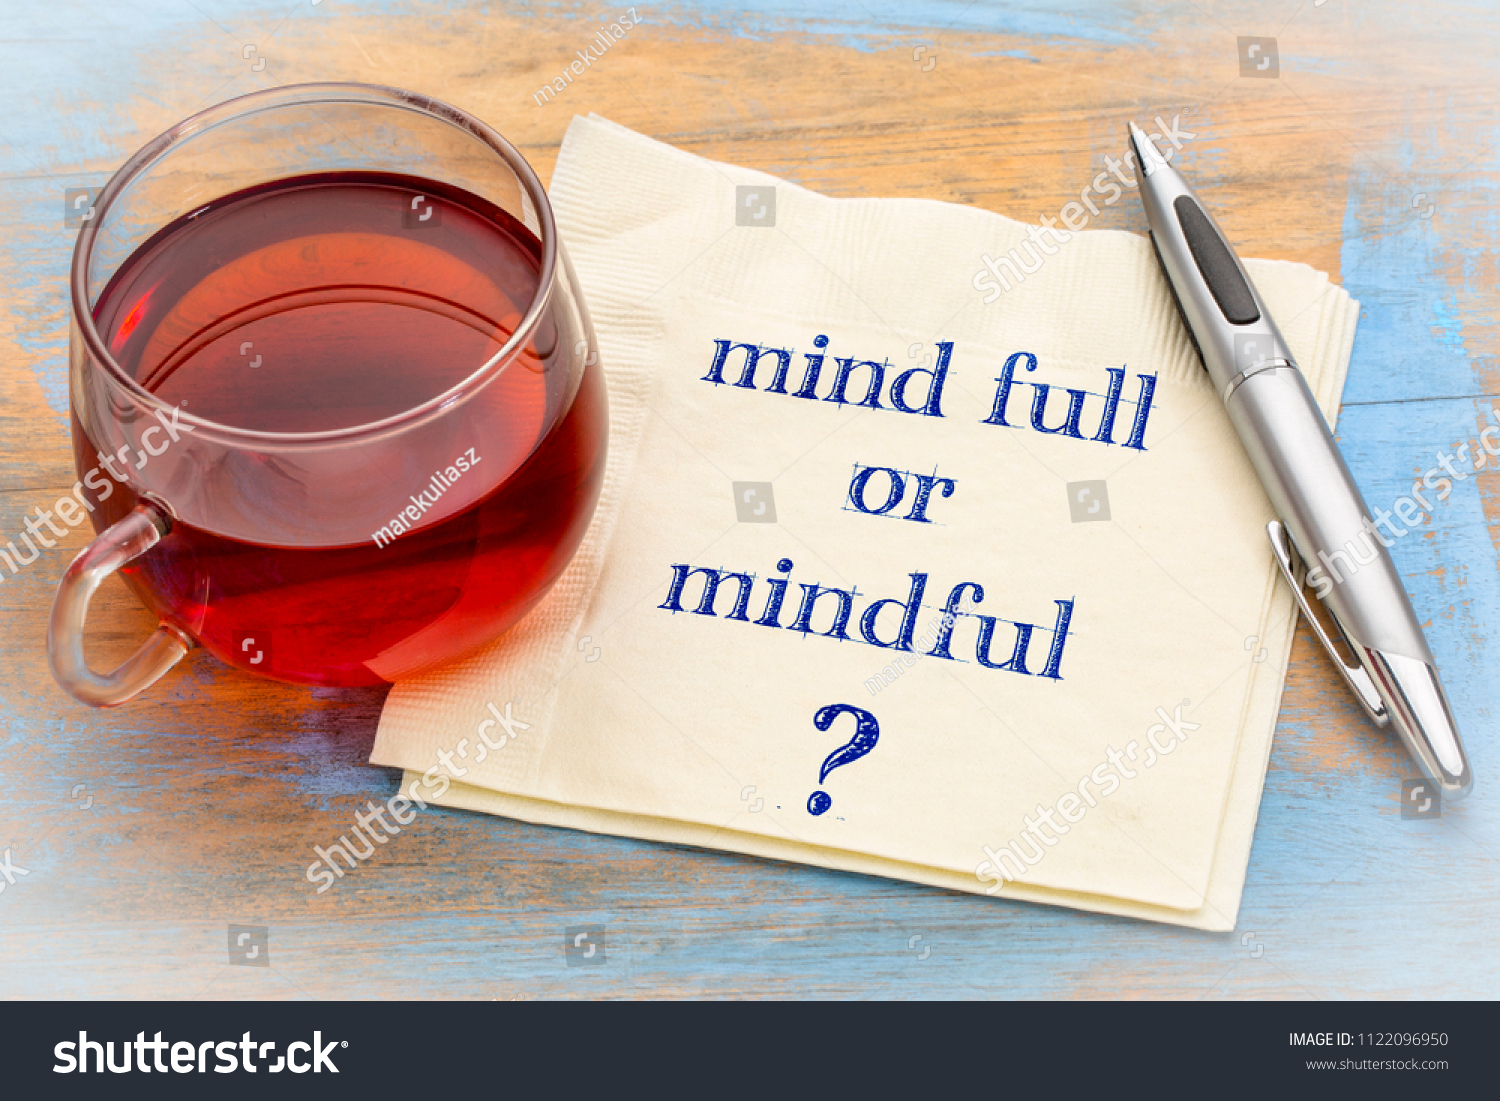 Mind full or mindful   Inspiraitonal handwriting on a napkin with a cup of tea. #1122096950